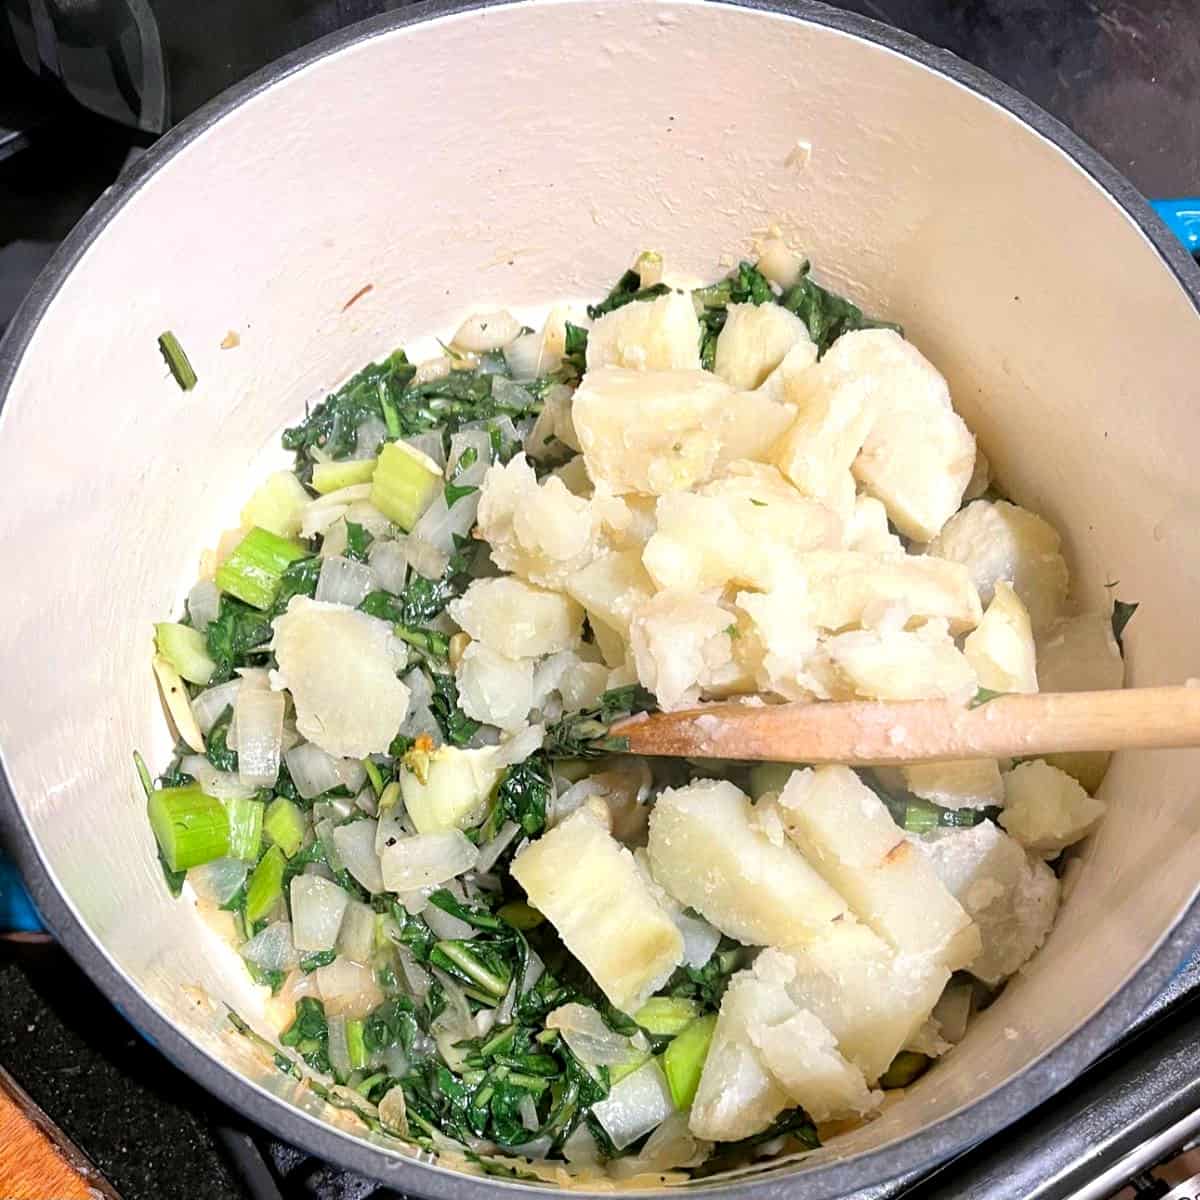 Potatoes added to pot with dandelion greens for soup.